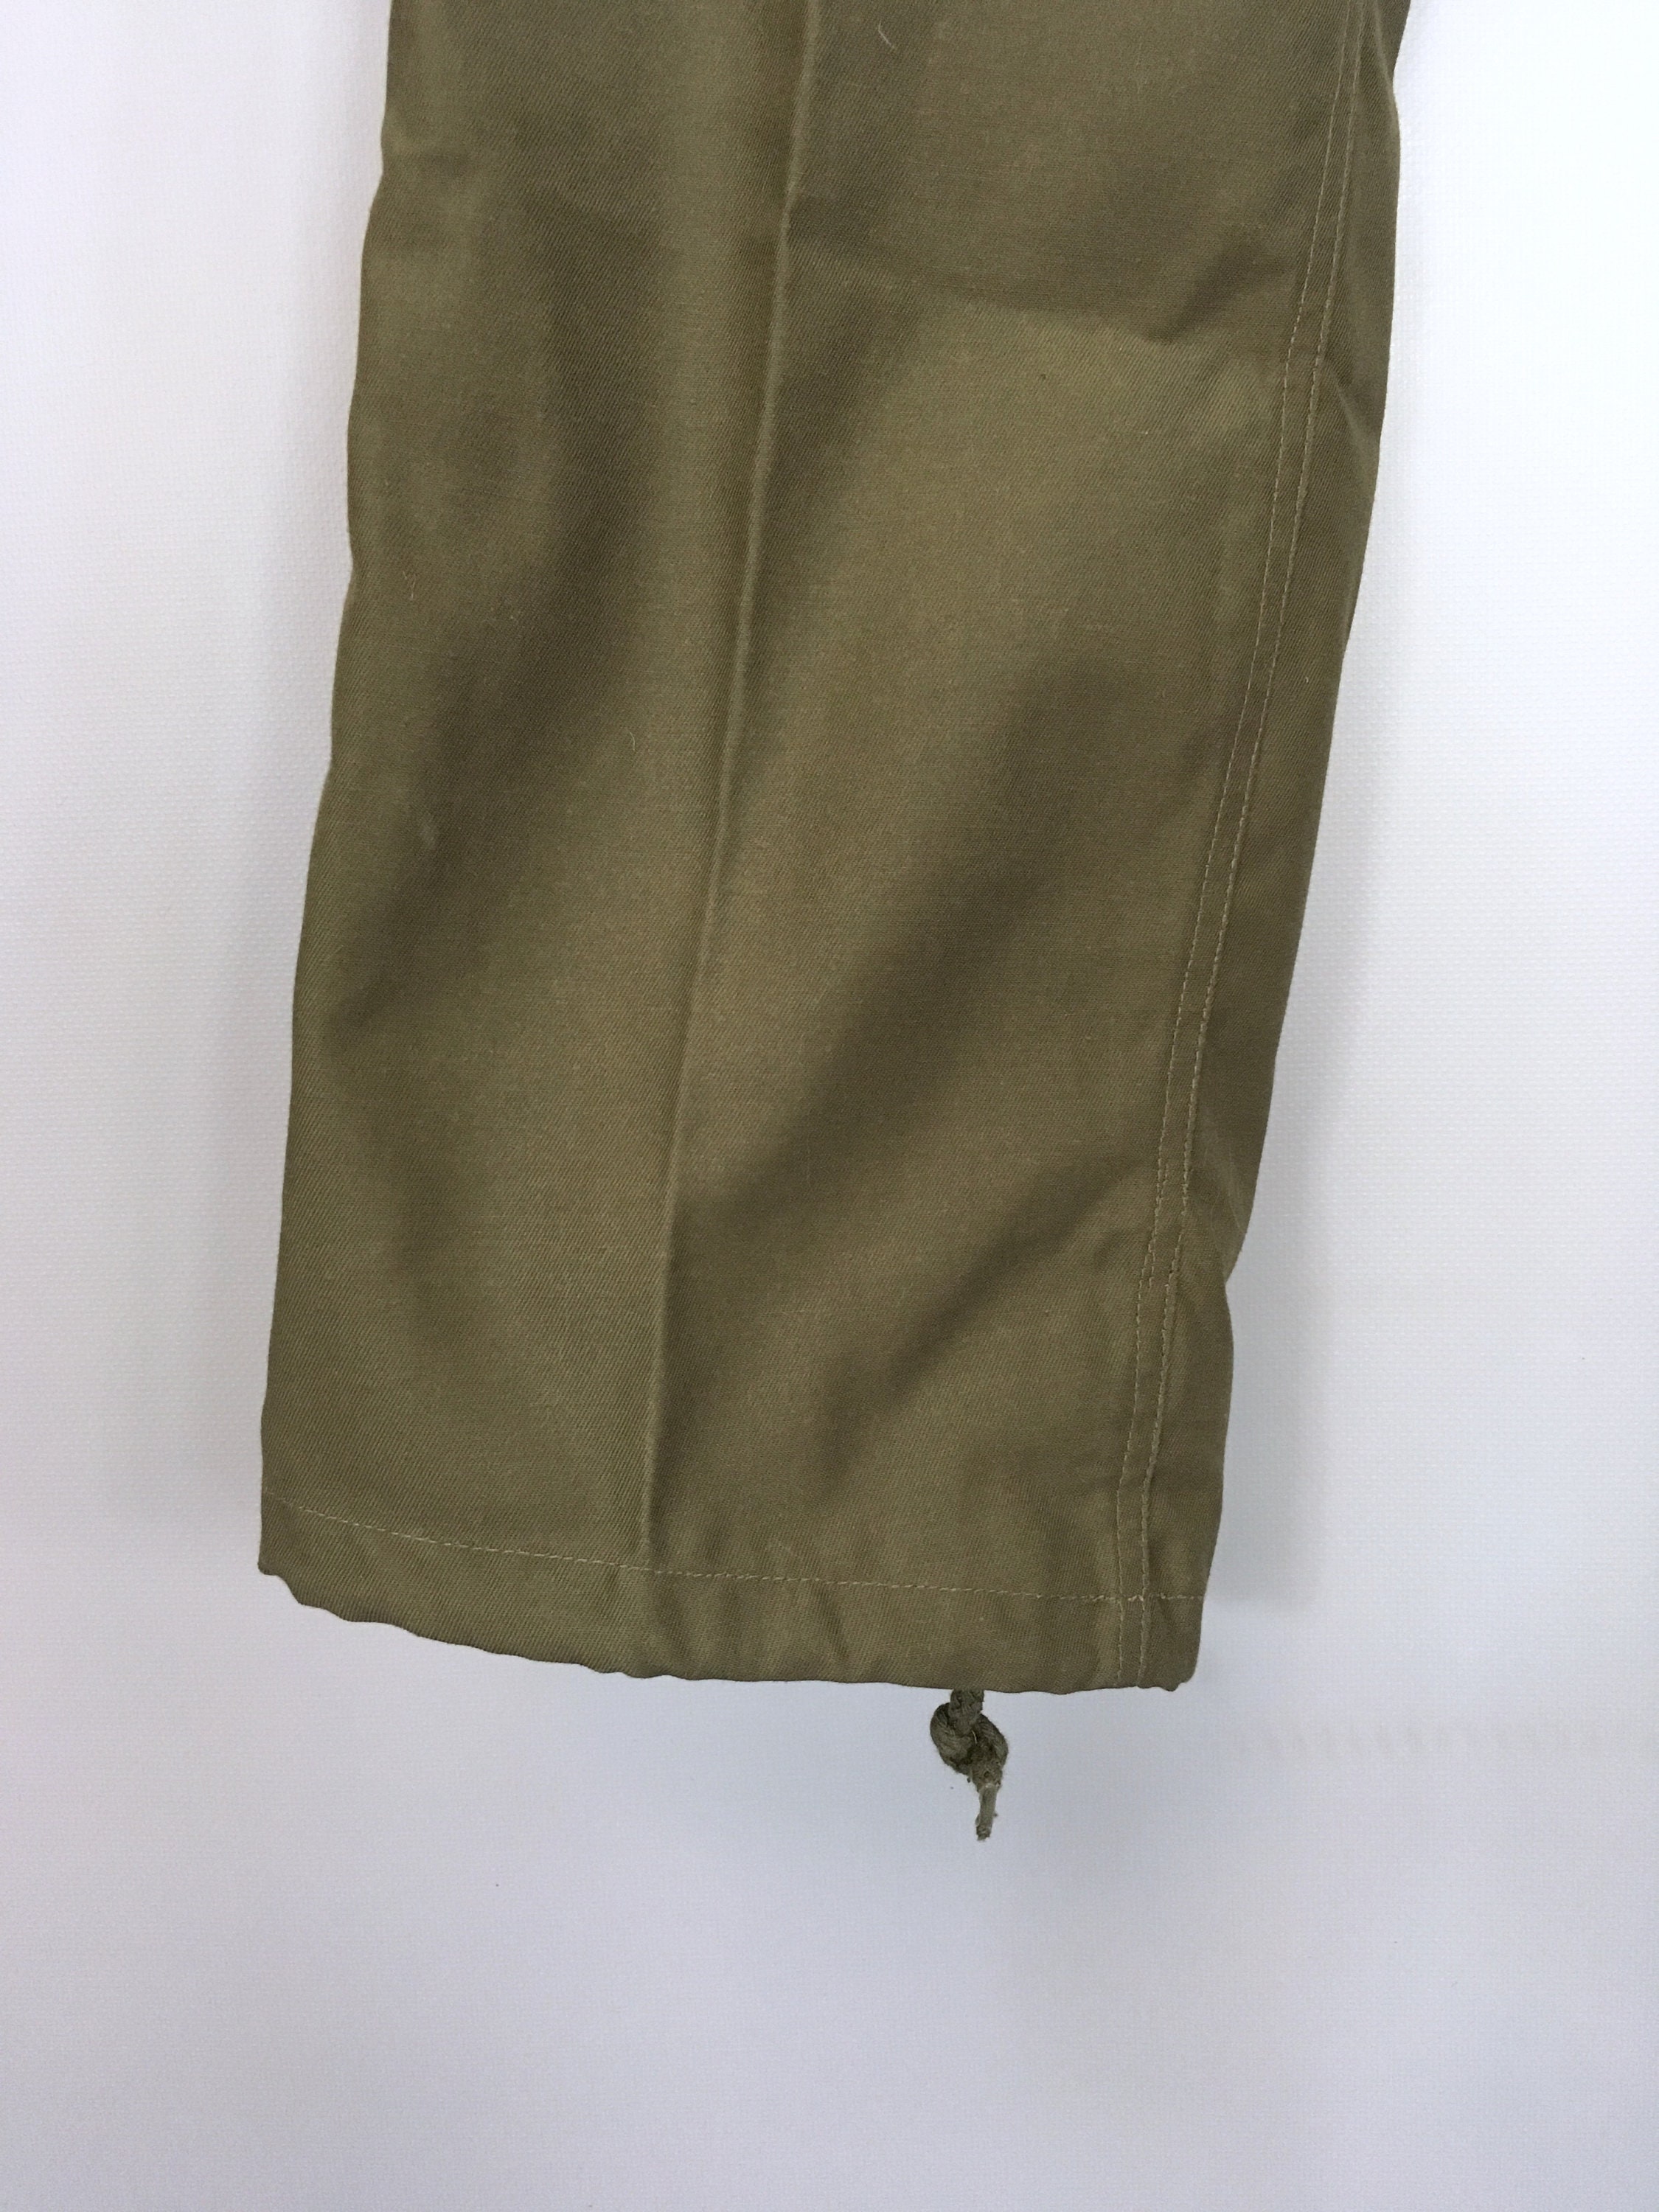 High Waisted 90s Cargo Pants Trousers Brand New Army Surplus - Etsy